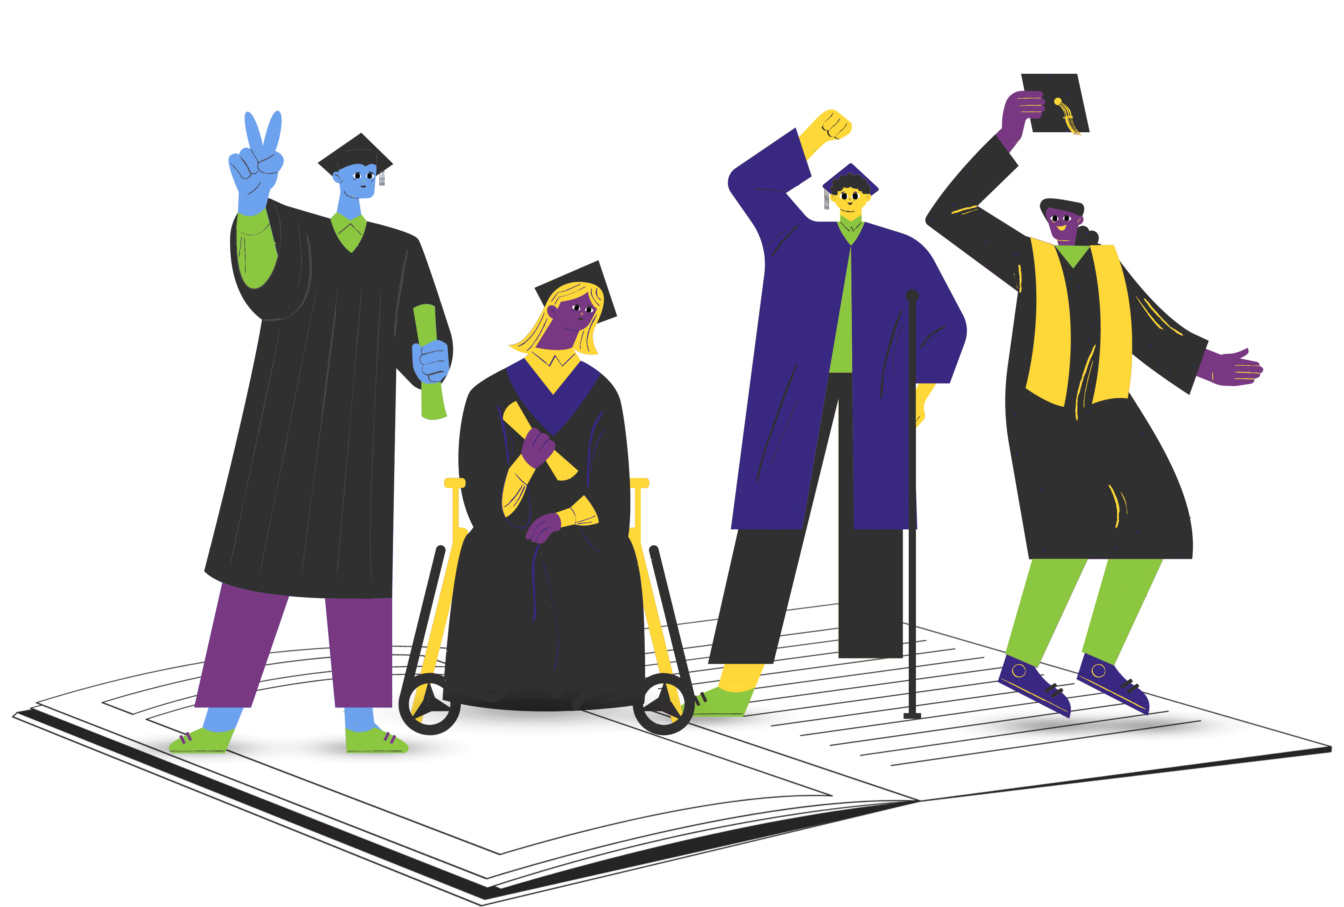 Illustration of students with disabilities graduating